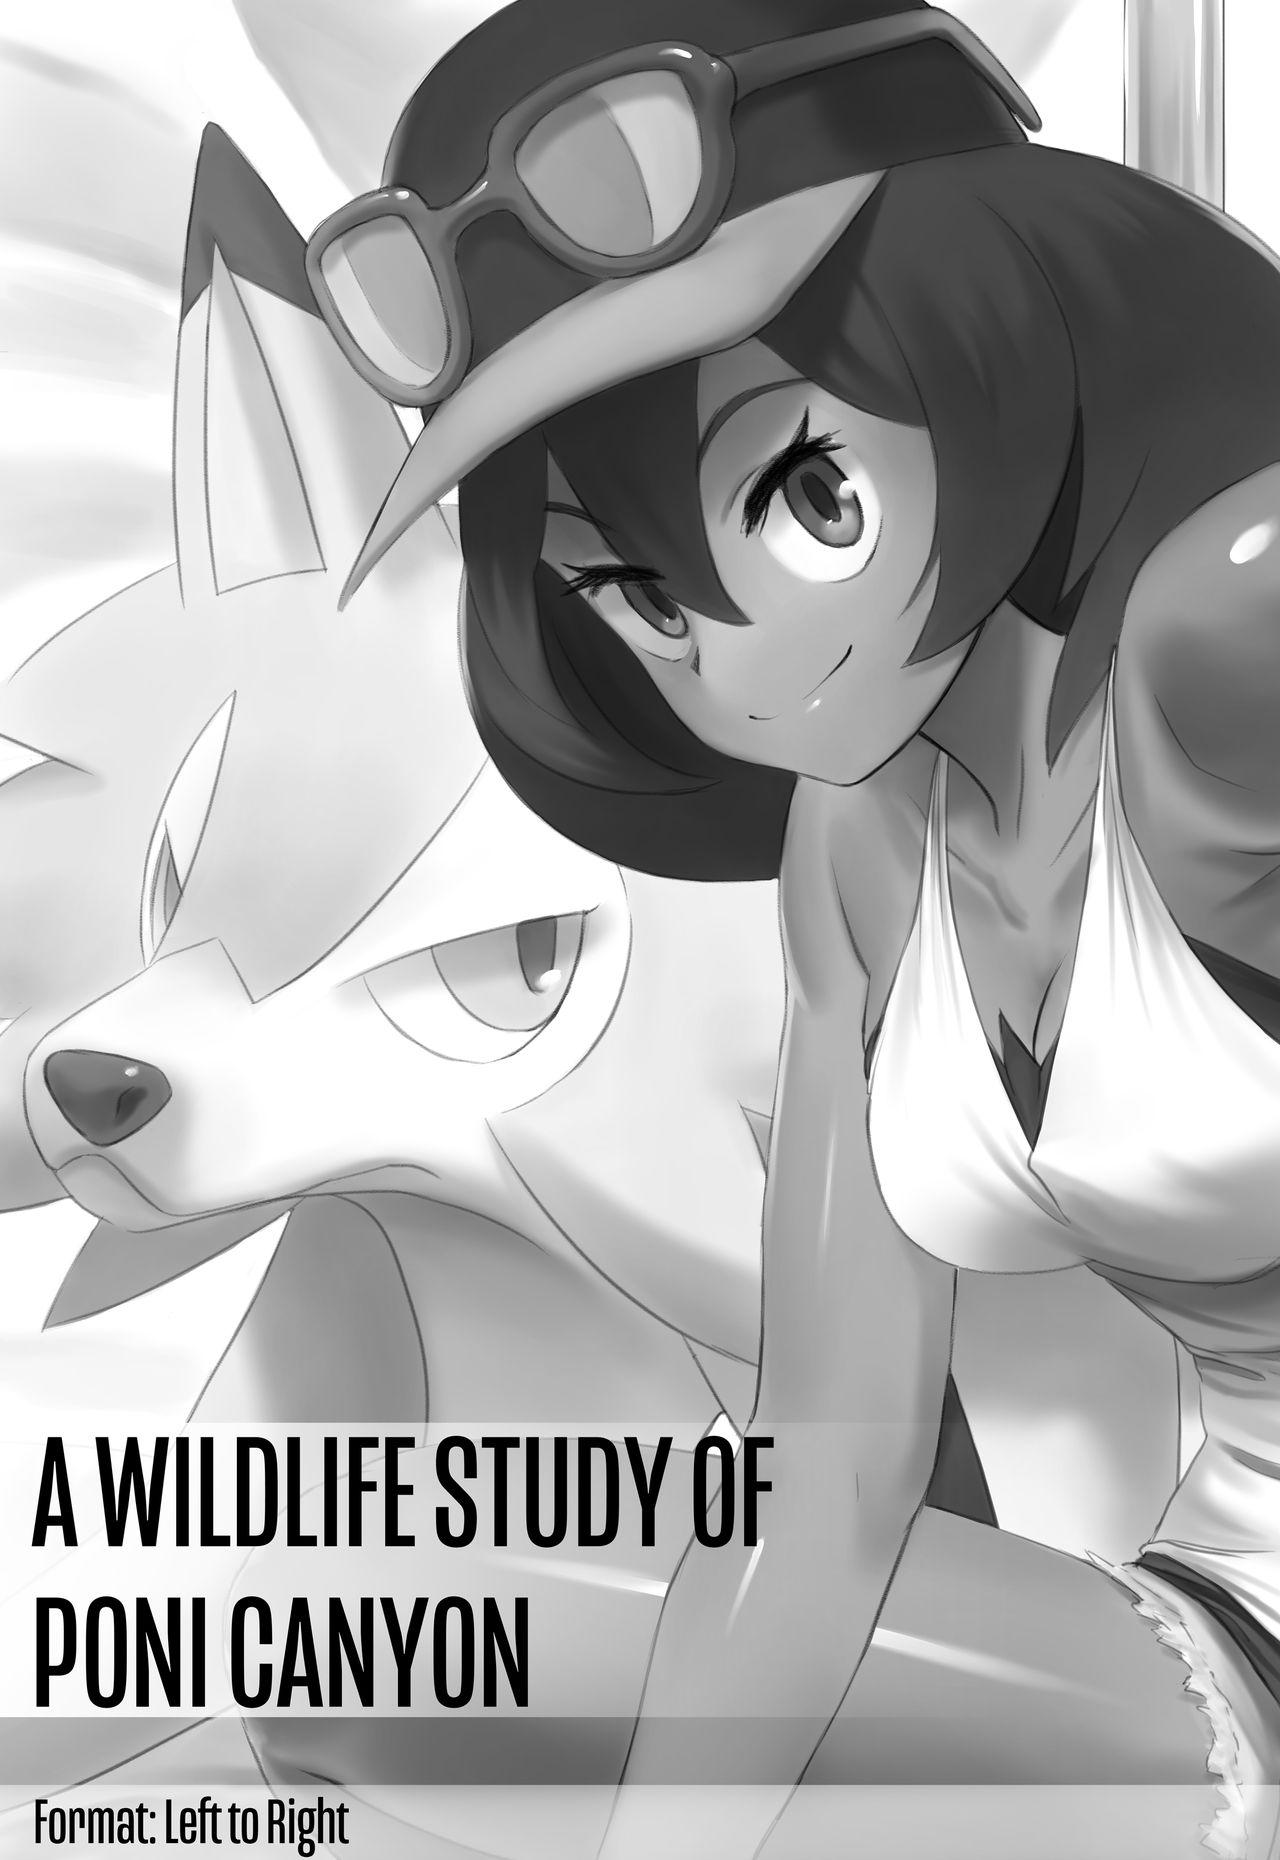 Stud A Wildlife Study of Poni Canyon - Pokemon | pocket monsters Crazy - Picture 1